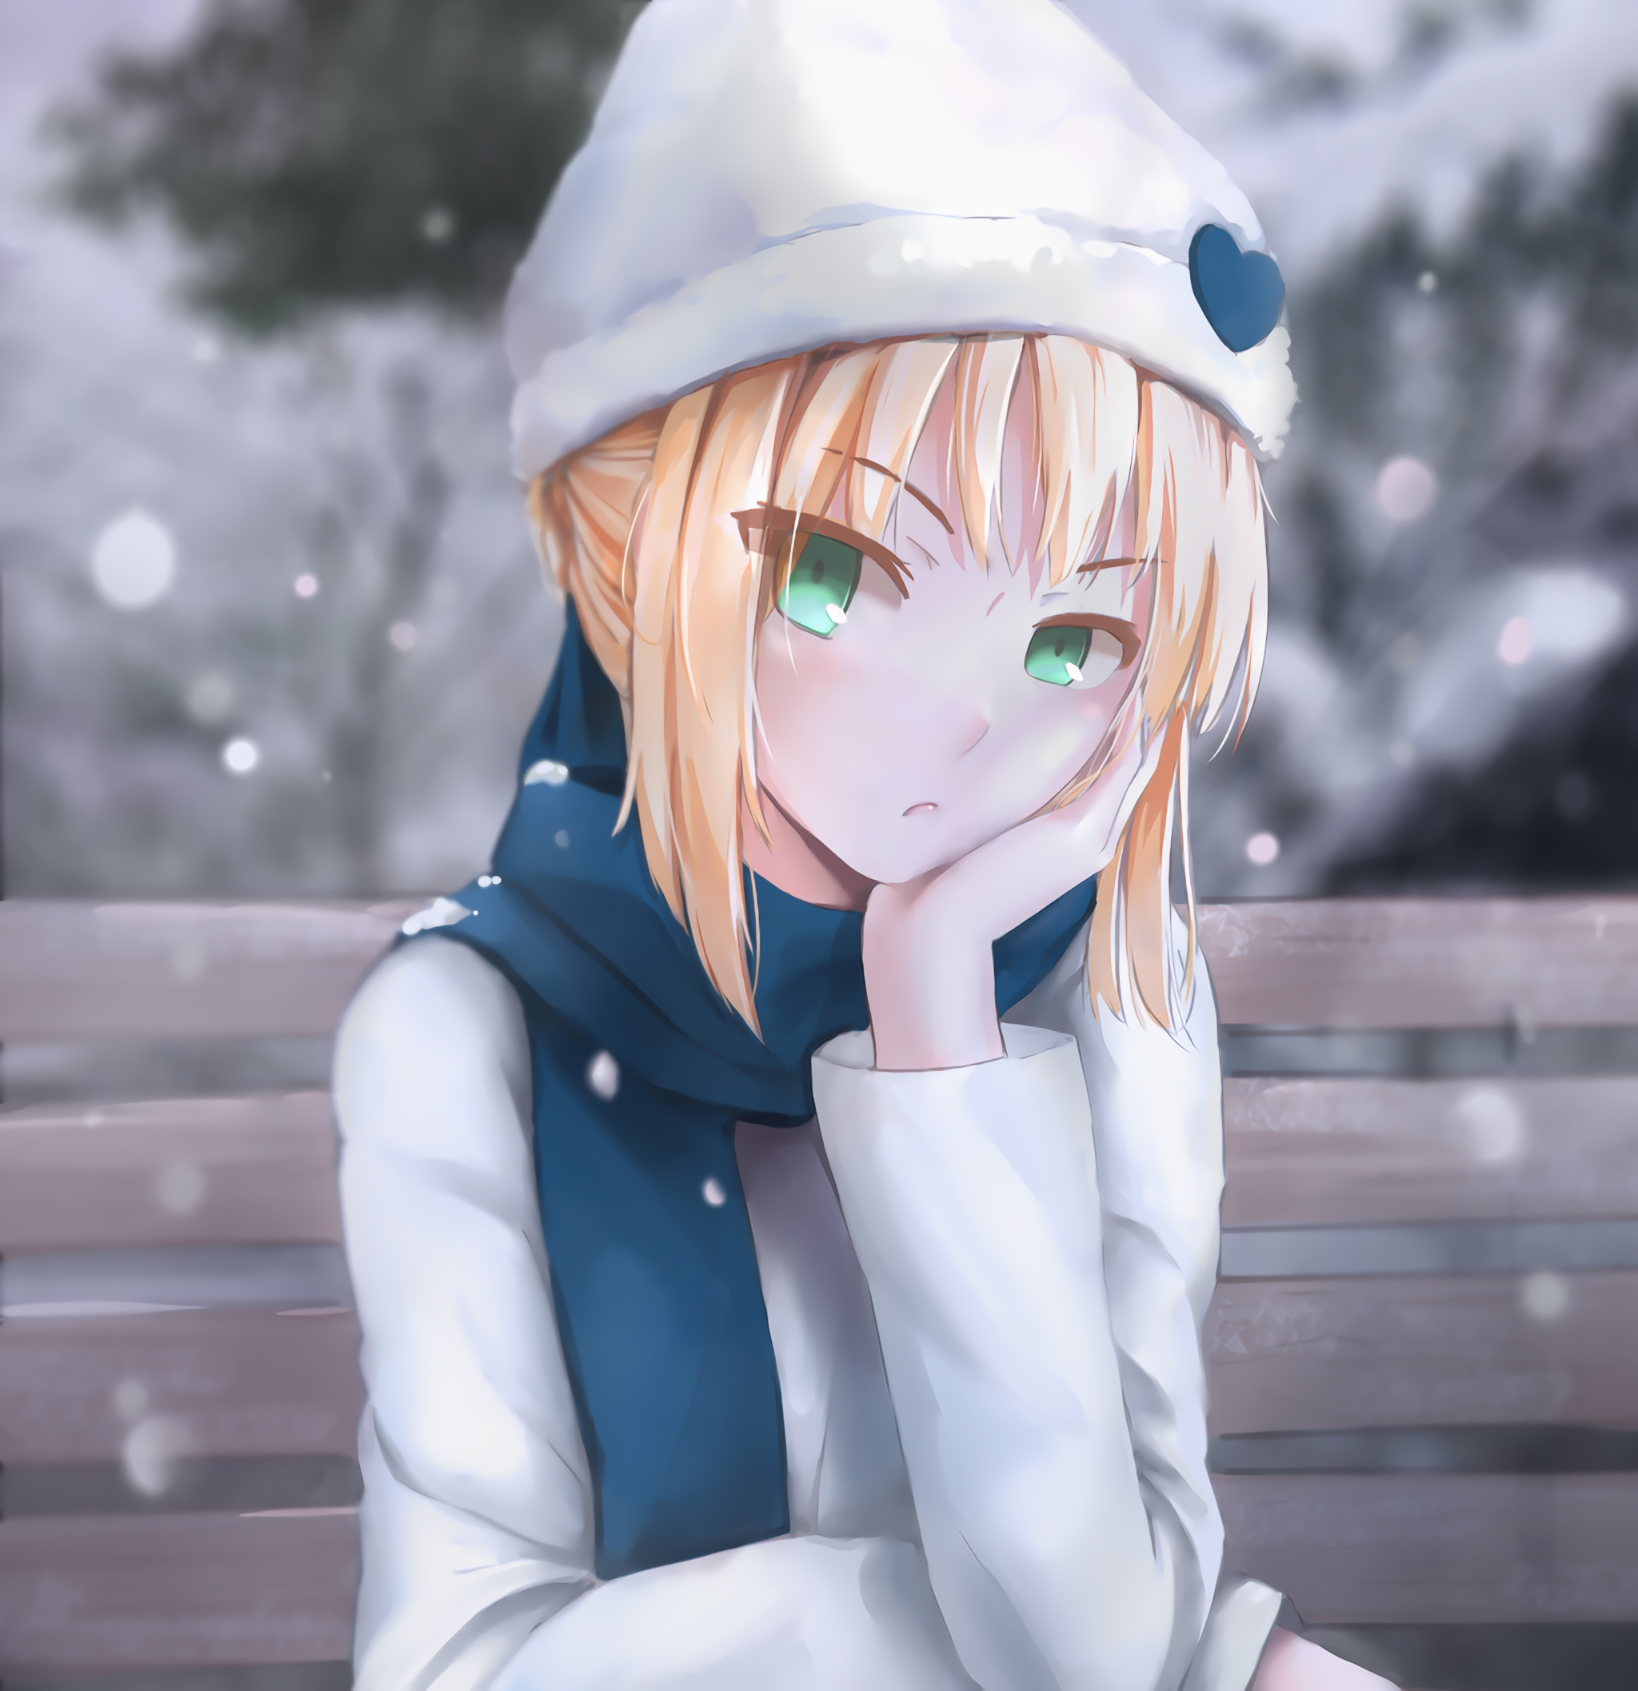 Fate Series FGO Fate Stay Night Anime Girls 2D Long Hair Snowing Blond Hair Arturia Pendragon Saber  1638x1691